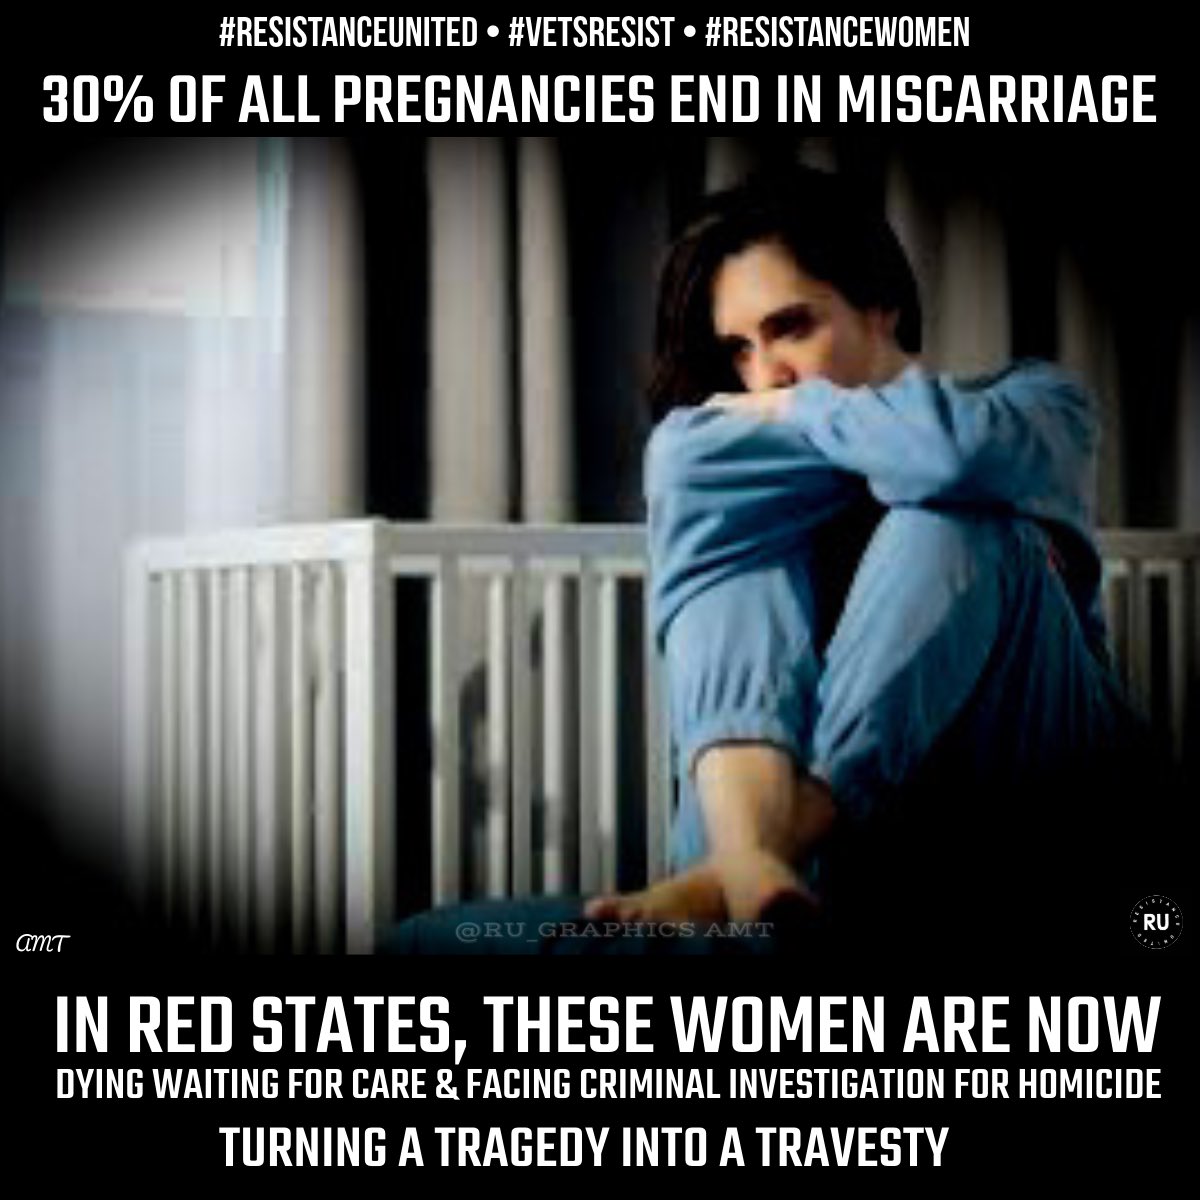 #ResistanceUnited miscarriage is the most common🤰complication Btwn🟥state bans causing those suffering w/miscarriages to die or permanent health cond, ERs refusing to even see🤰or investigating miscarriages as possible homicide 🤰in🟥states put their lives & freedom on the line